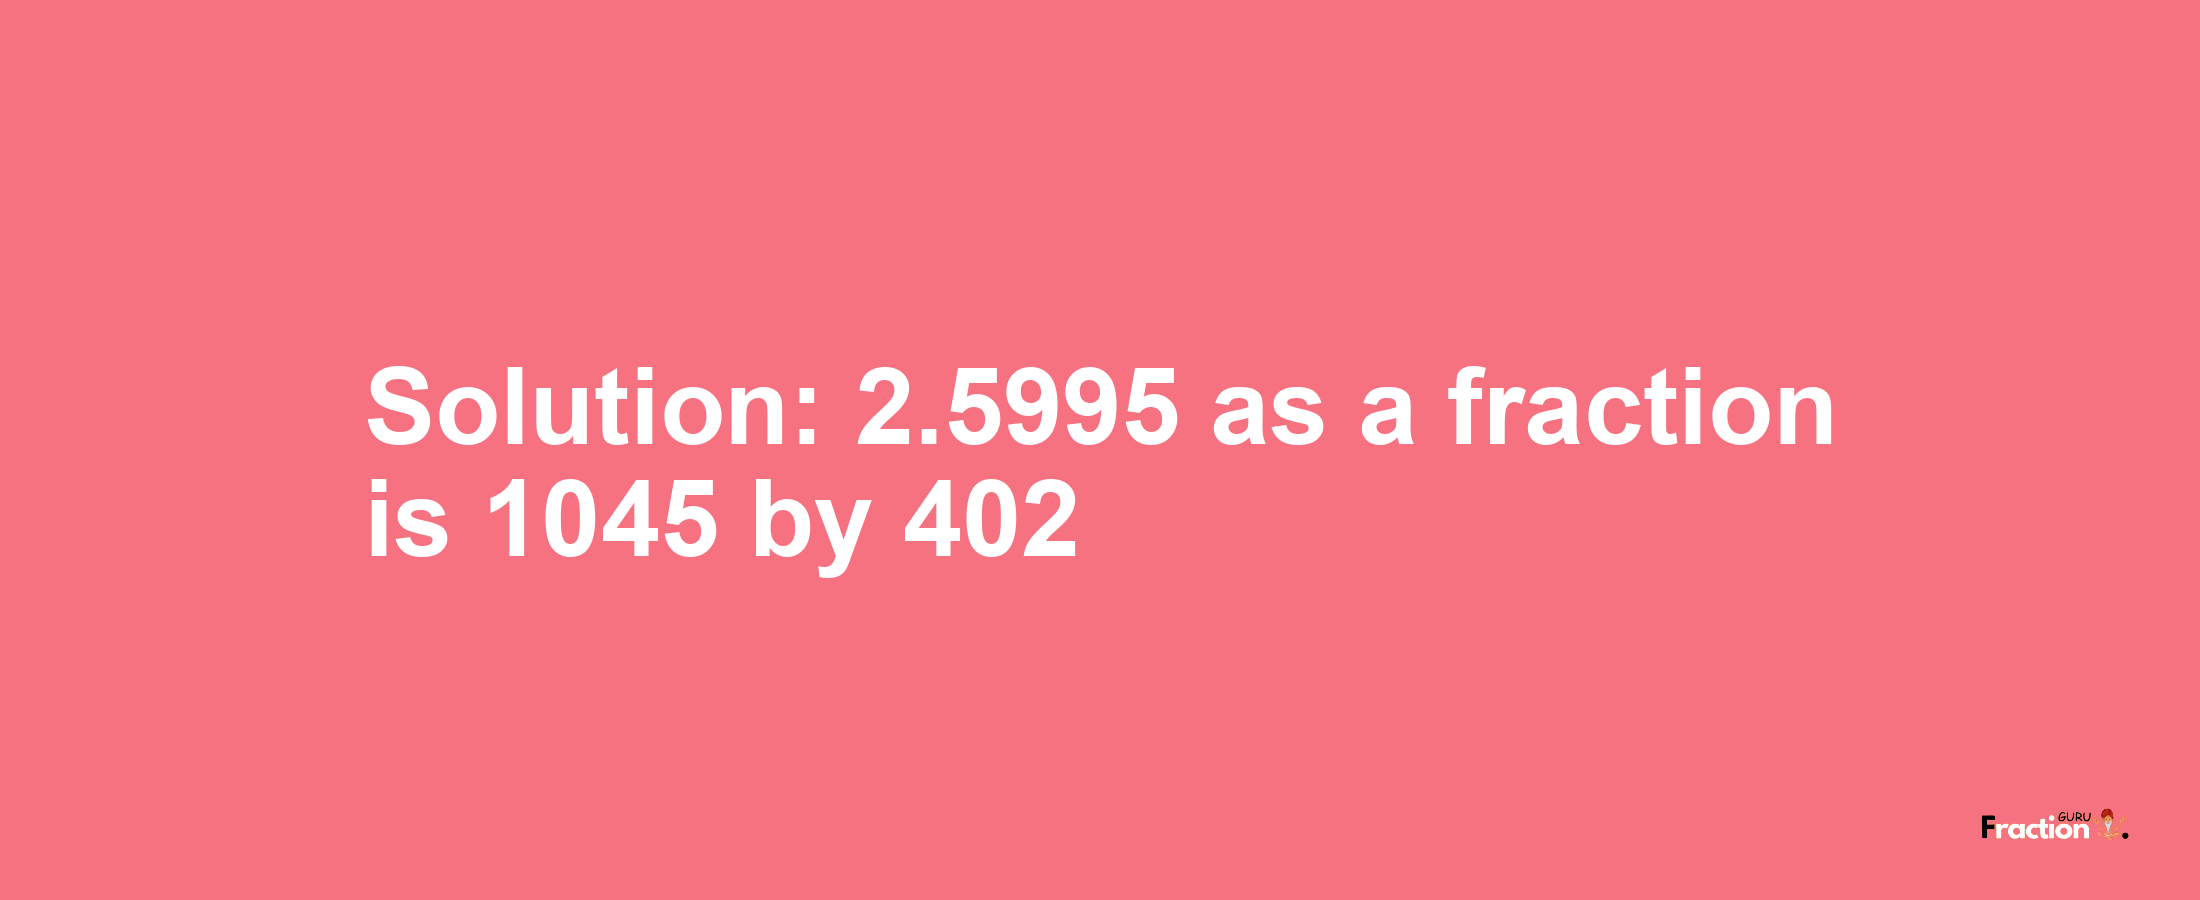 Solution:2.5995 as a fraction is 1045/402